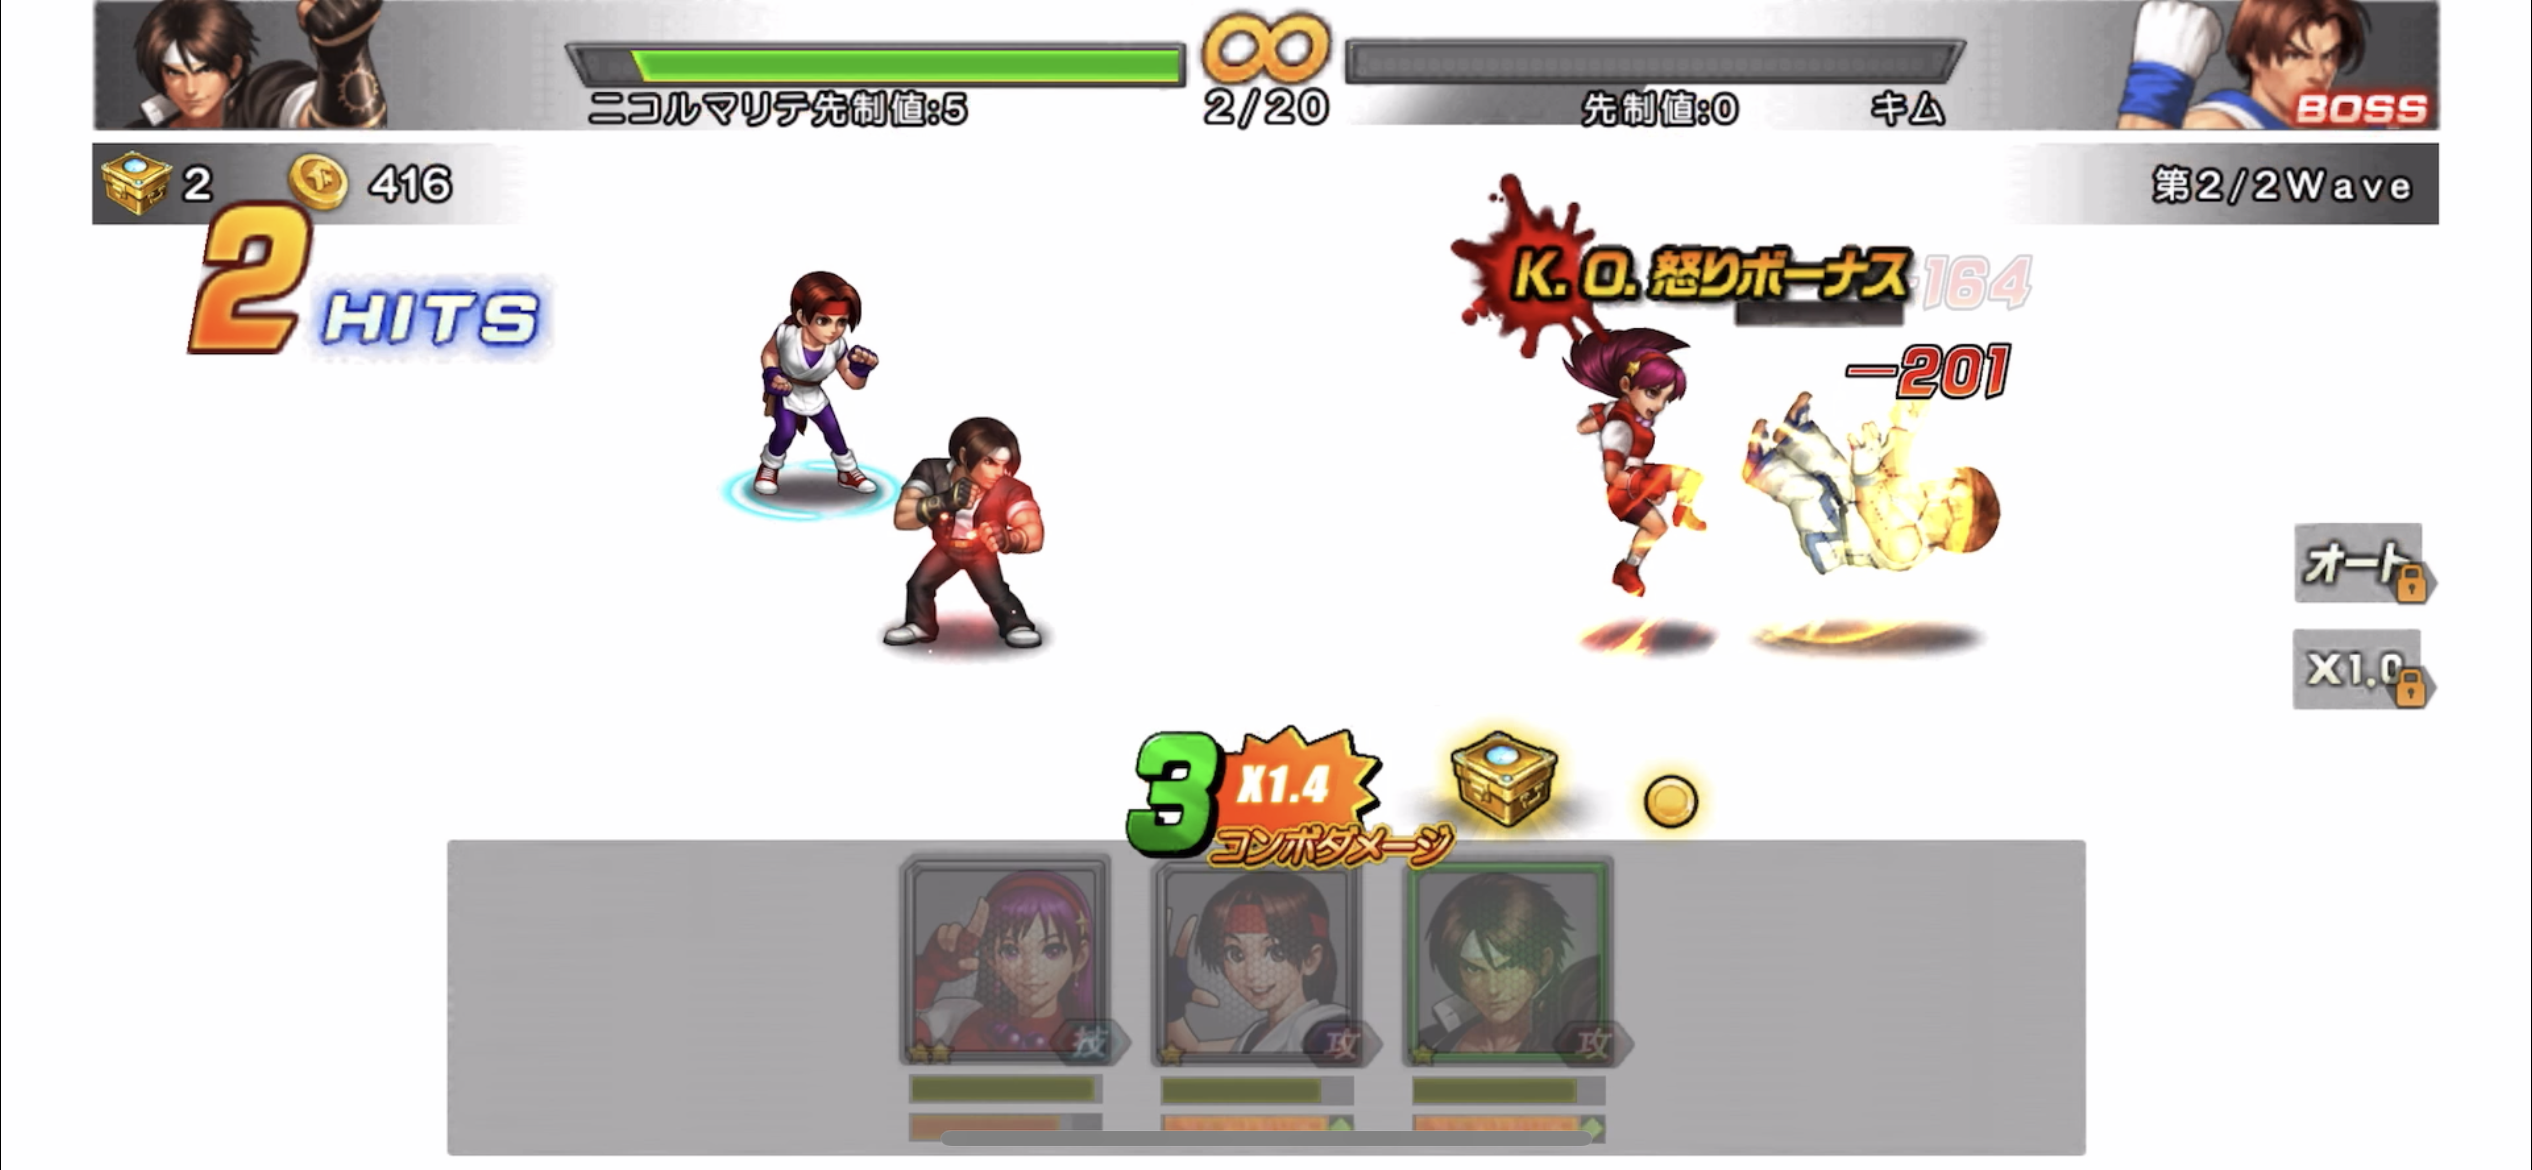 『THE KING OF FIGHTERS '98 UM OL』の魅力②